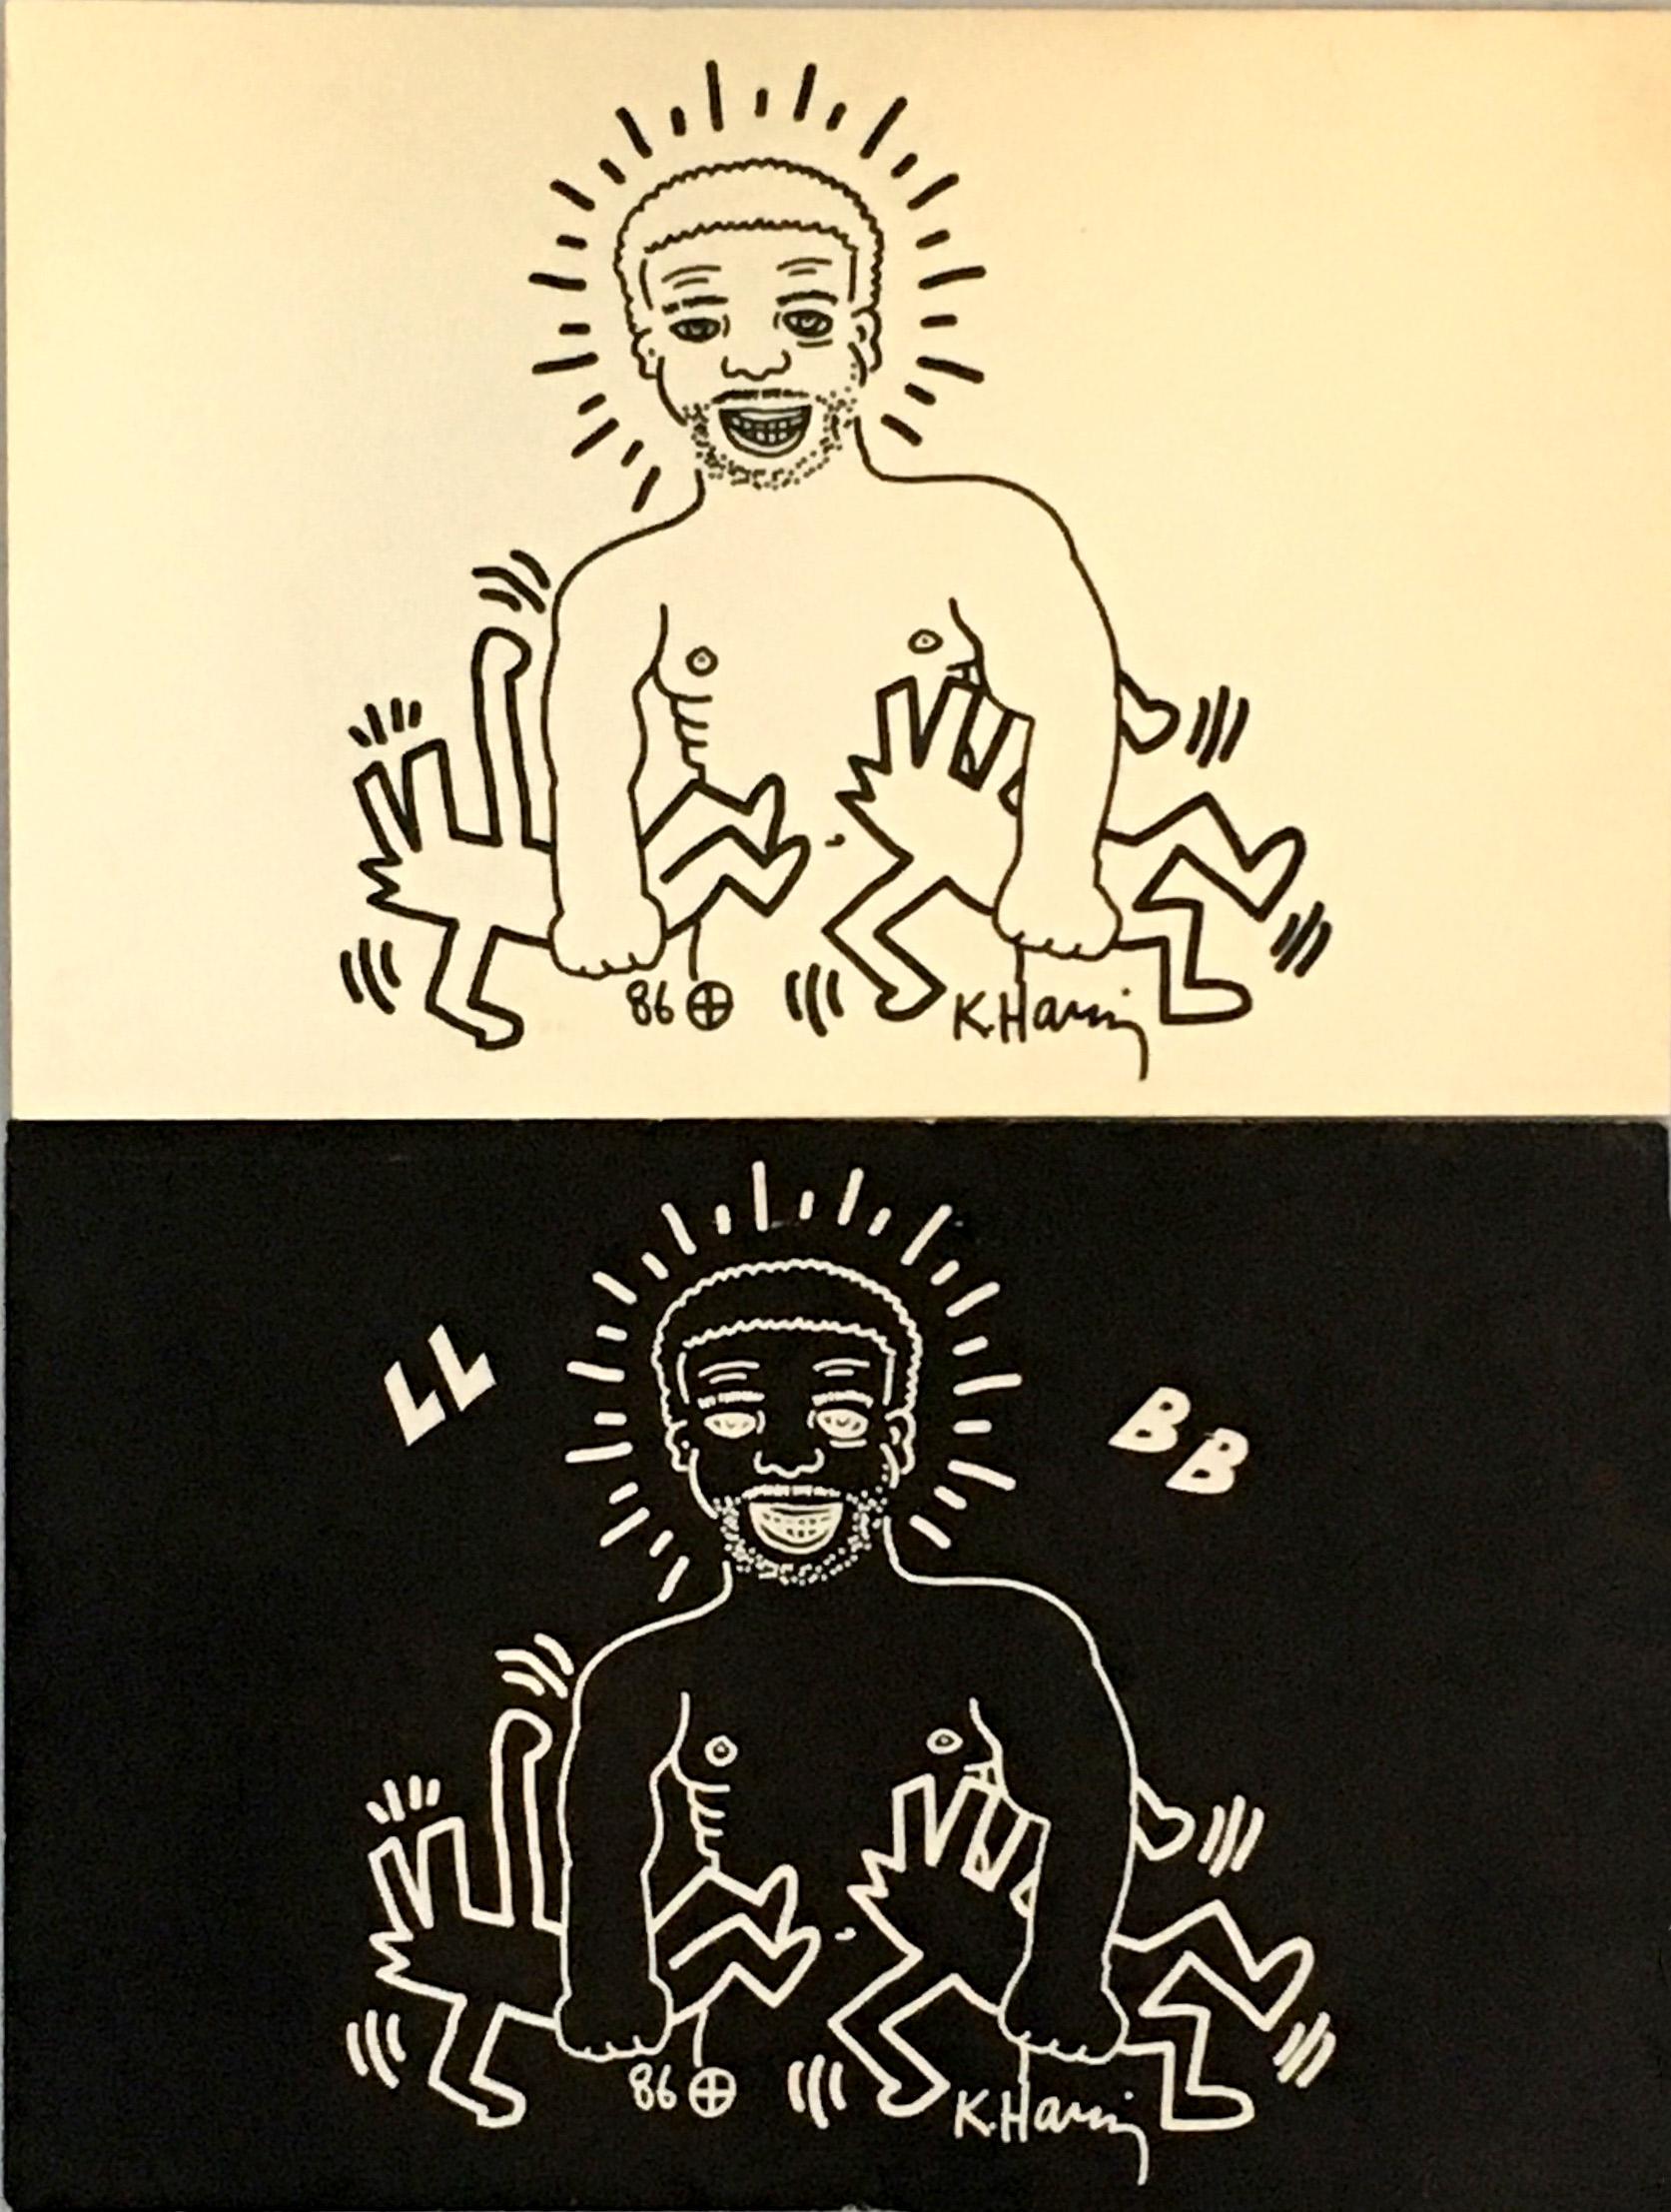 Keith Haring for Paradise Garage 1986 (Keith Haring, Larry Levan)  1